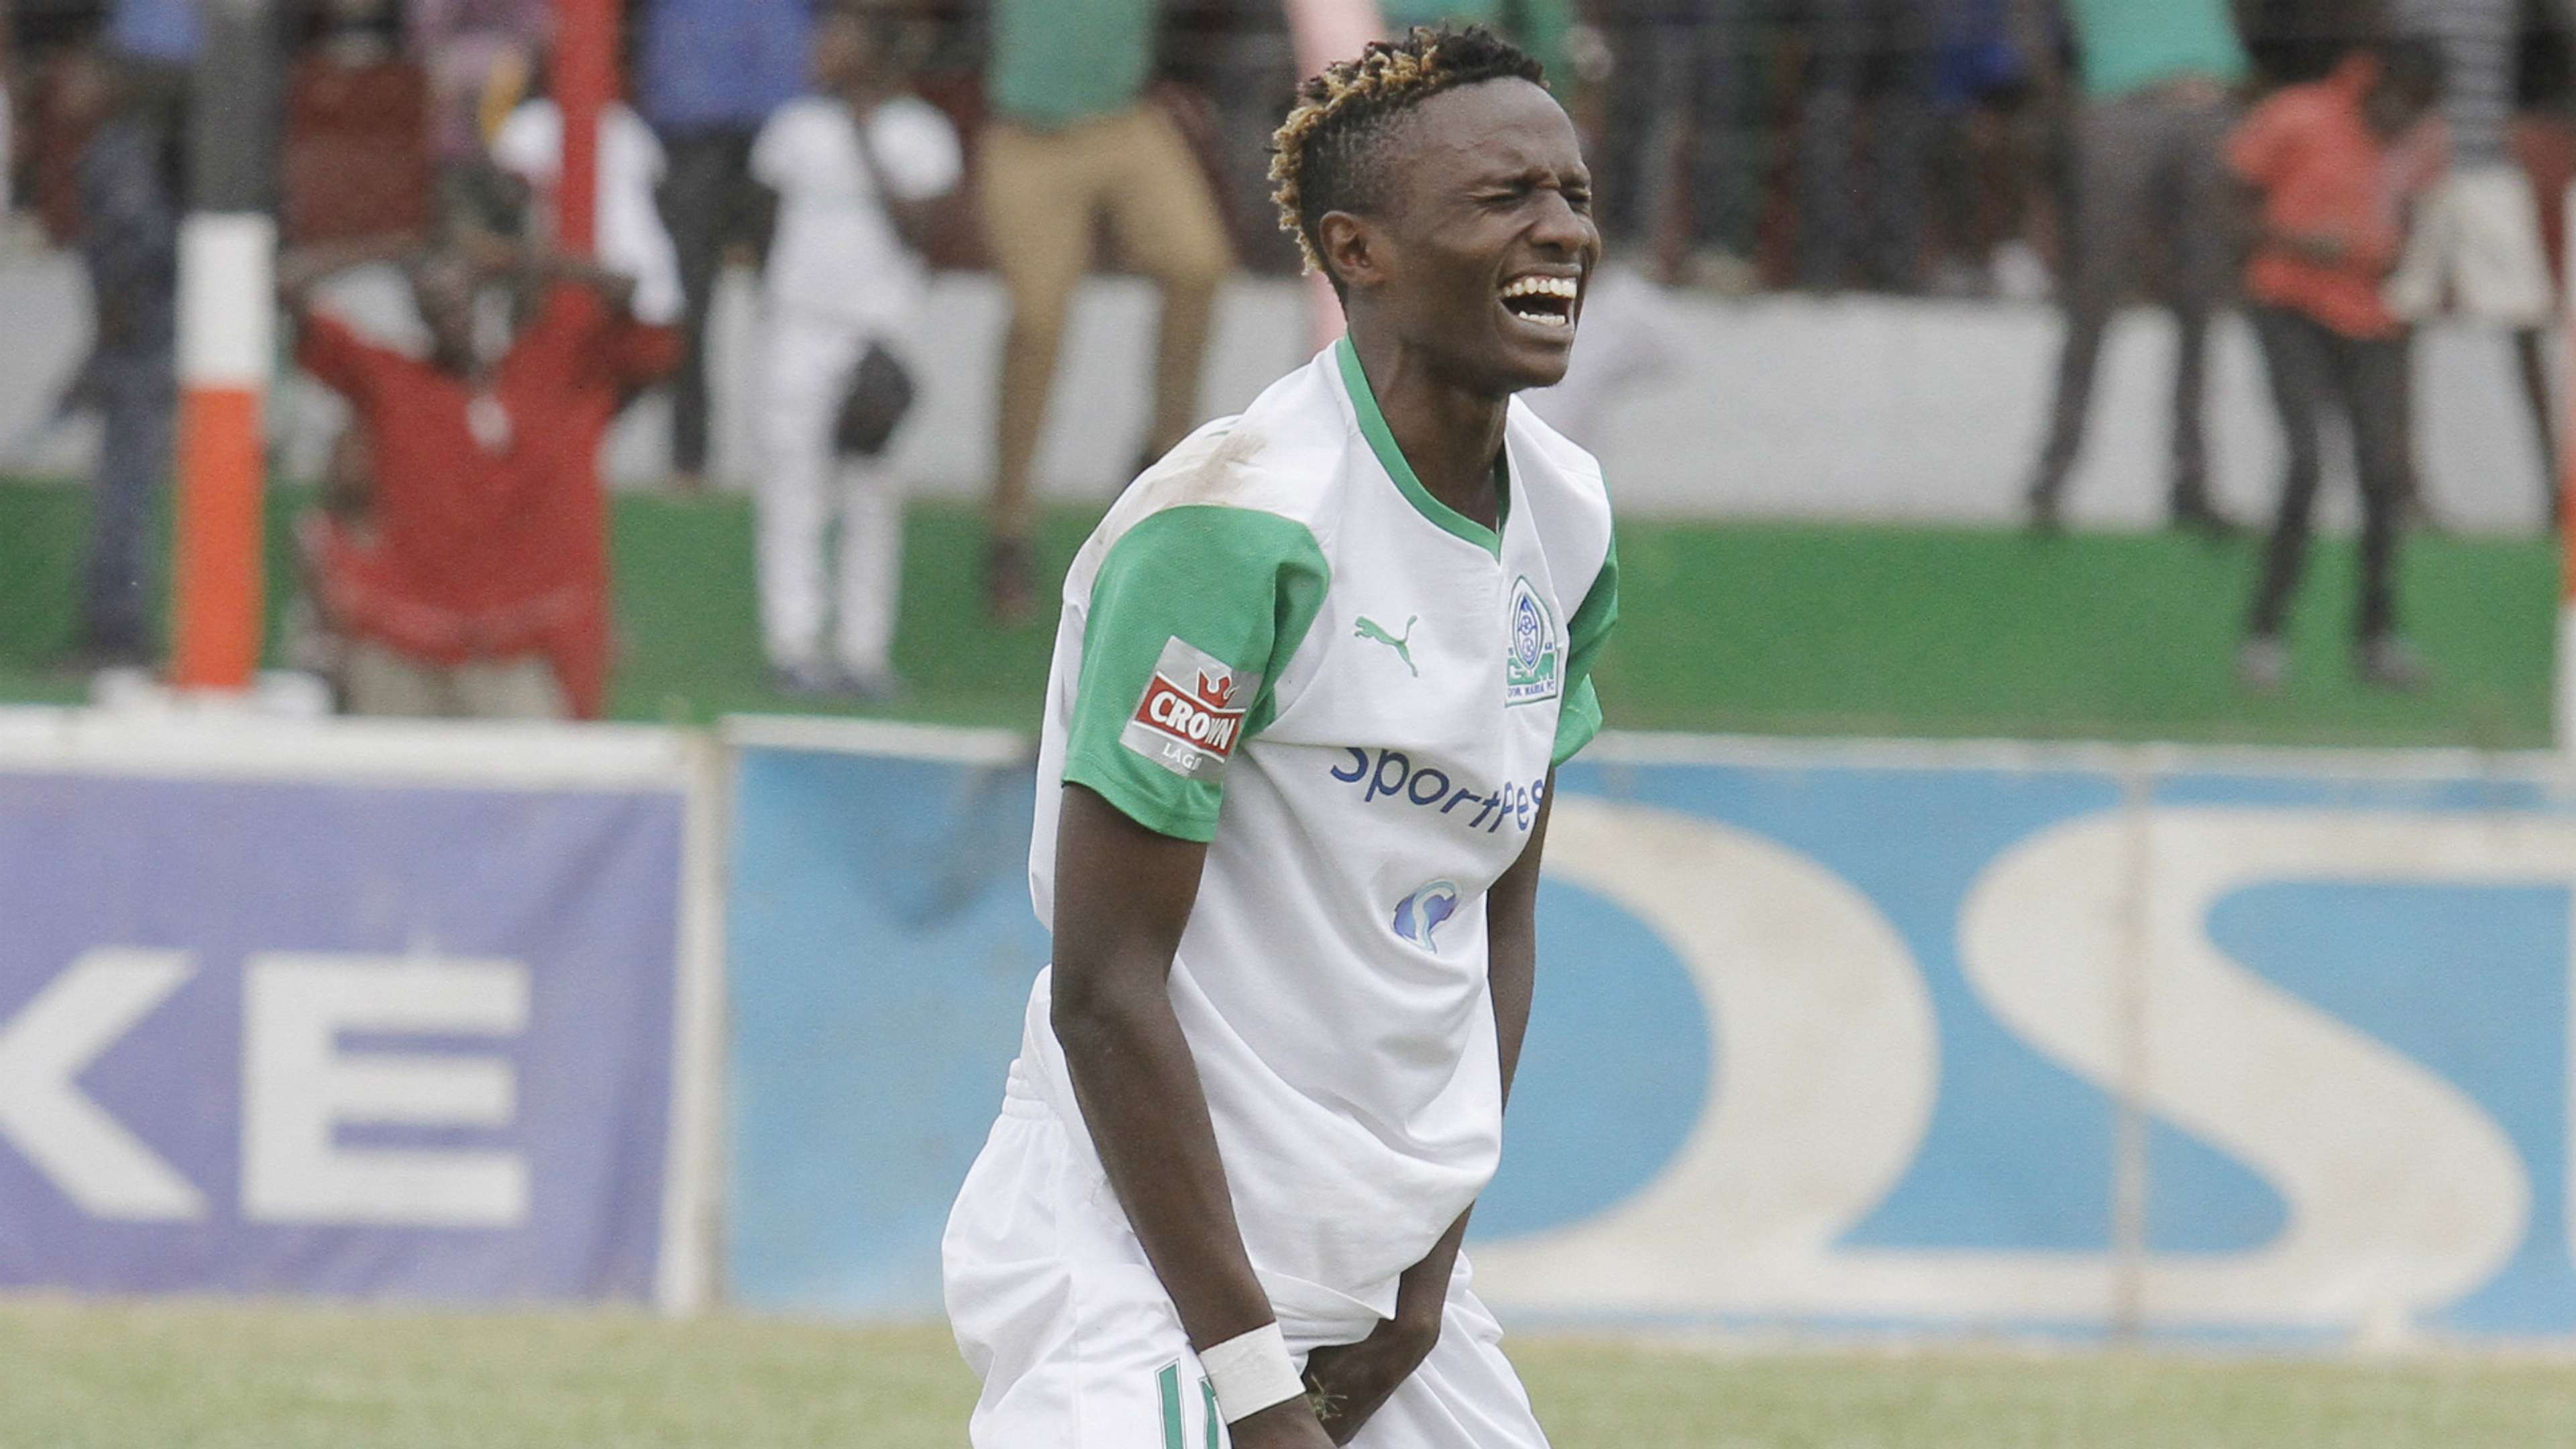 Gor Mahia new signing Kenneth Muguna reacts after a hard challenge from Tusker player.